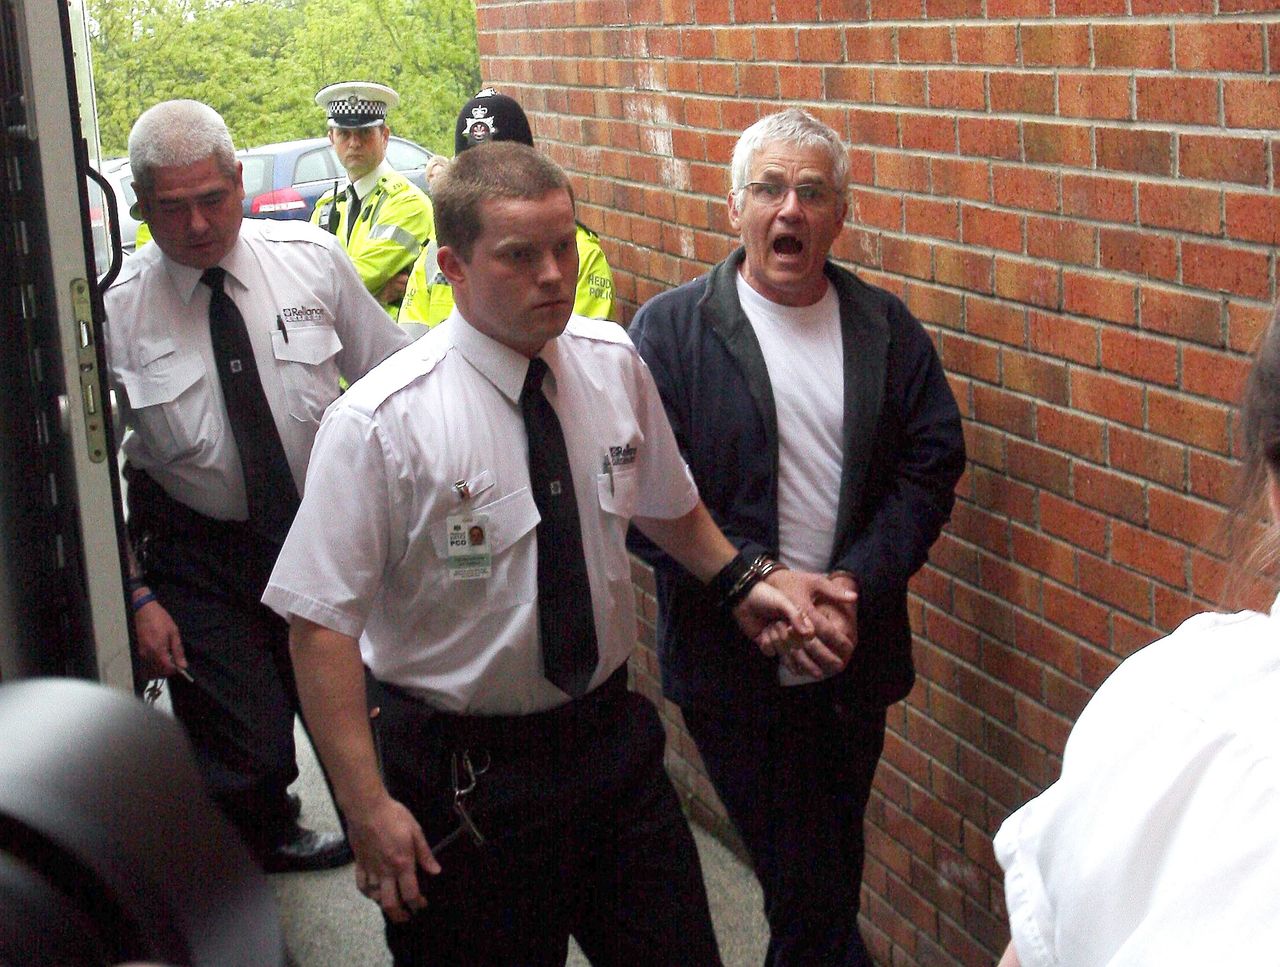 John Cooper (right) pictured arriving at Haverfordwest Magistrates Court in Wales in May 2009 